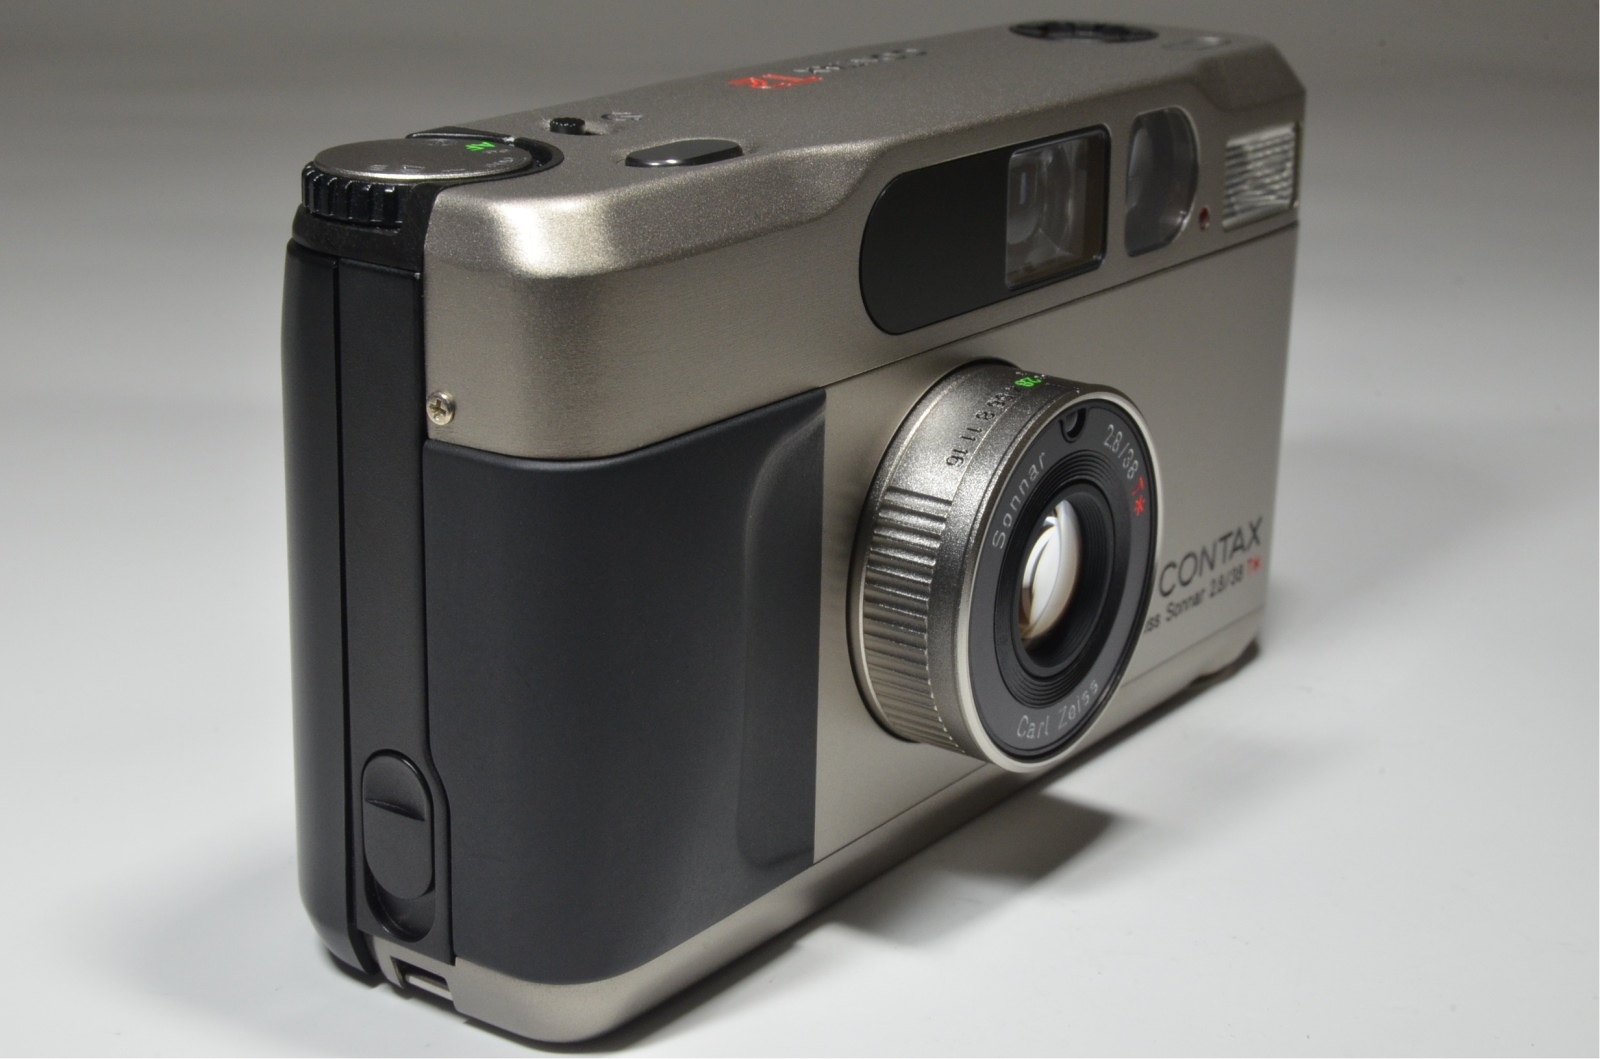 contax t2 data back point & shoot 35mm film camera